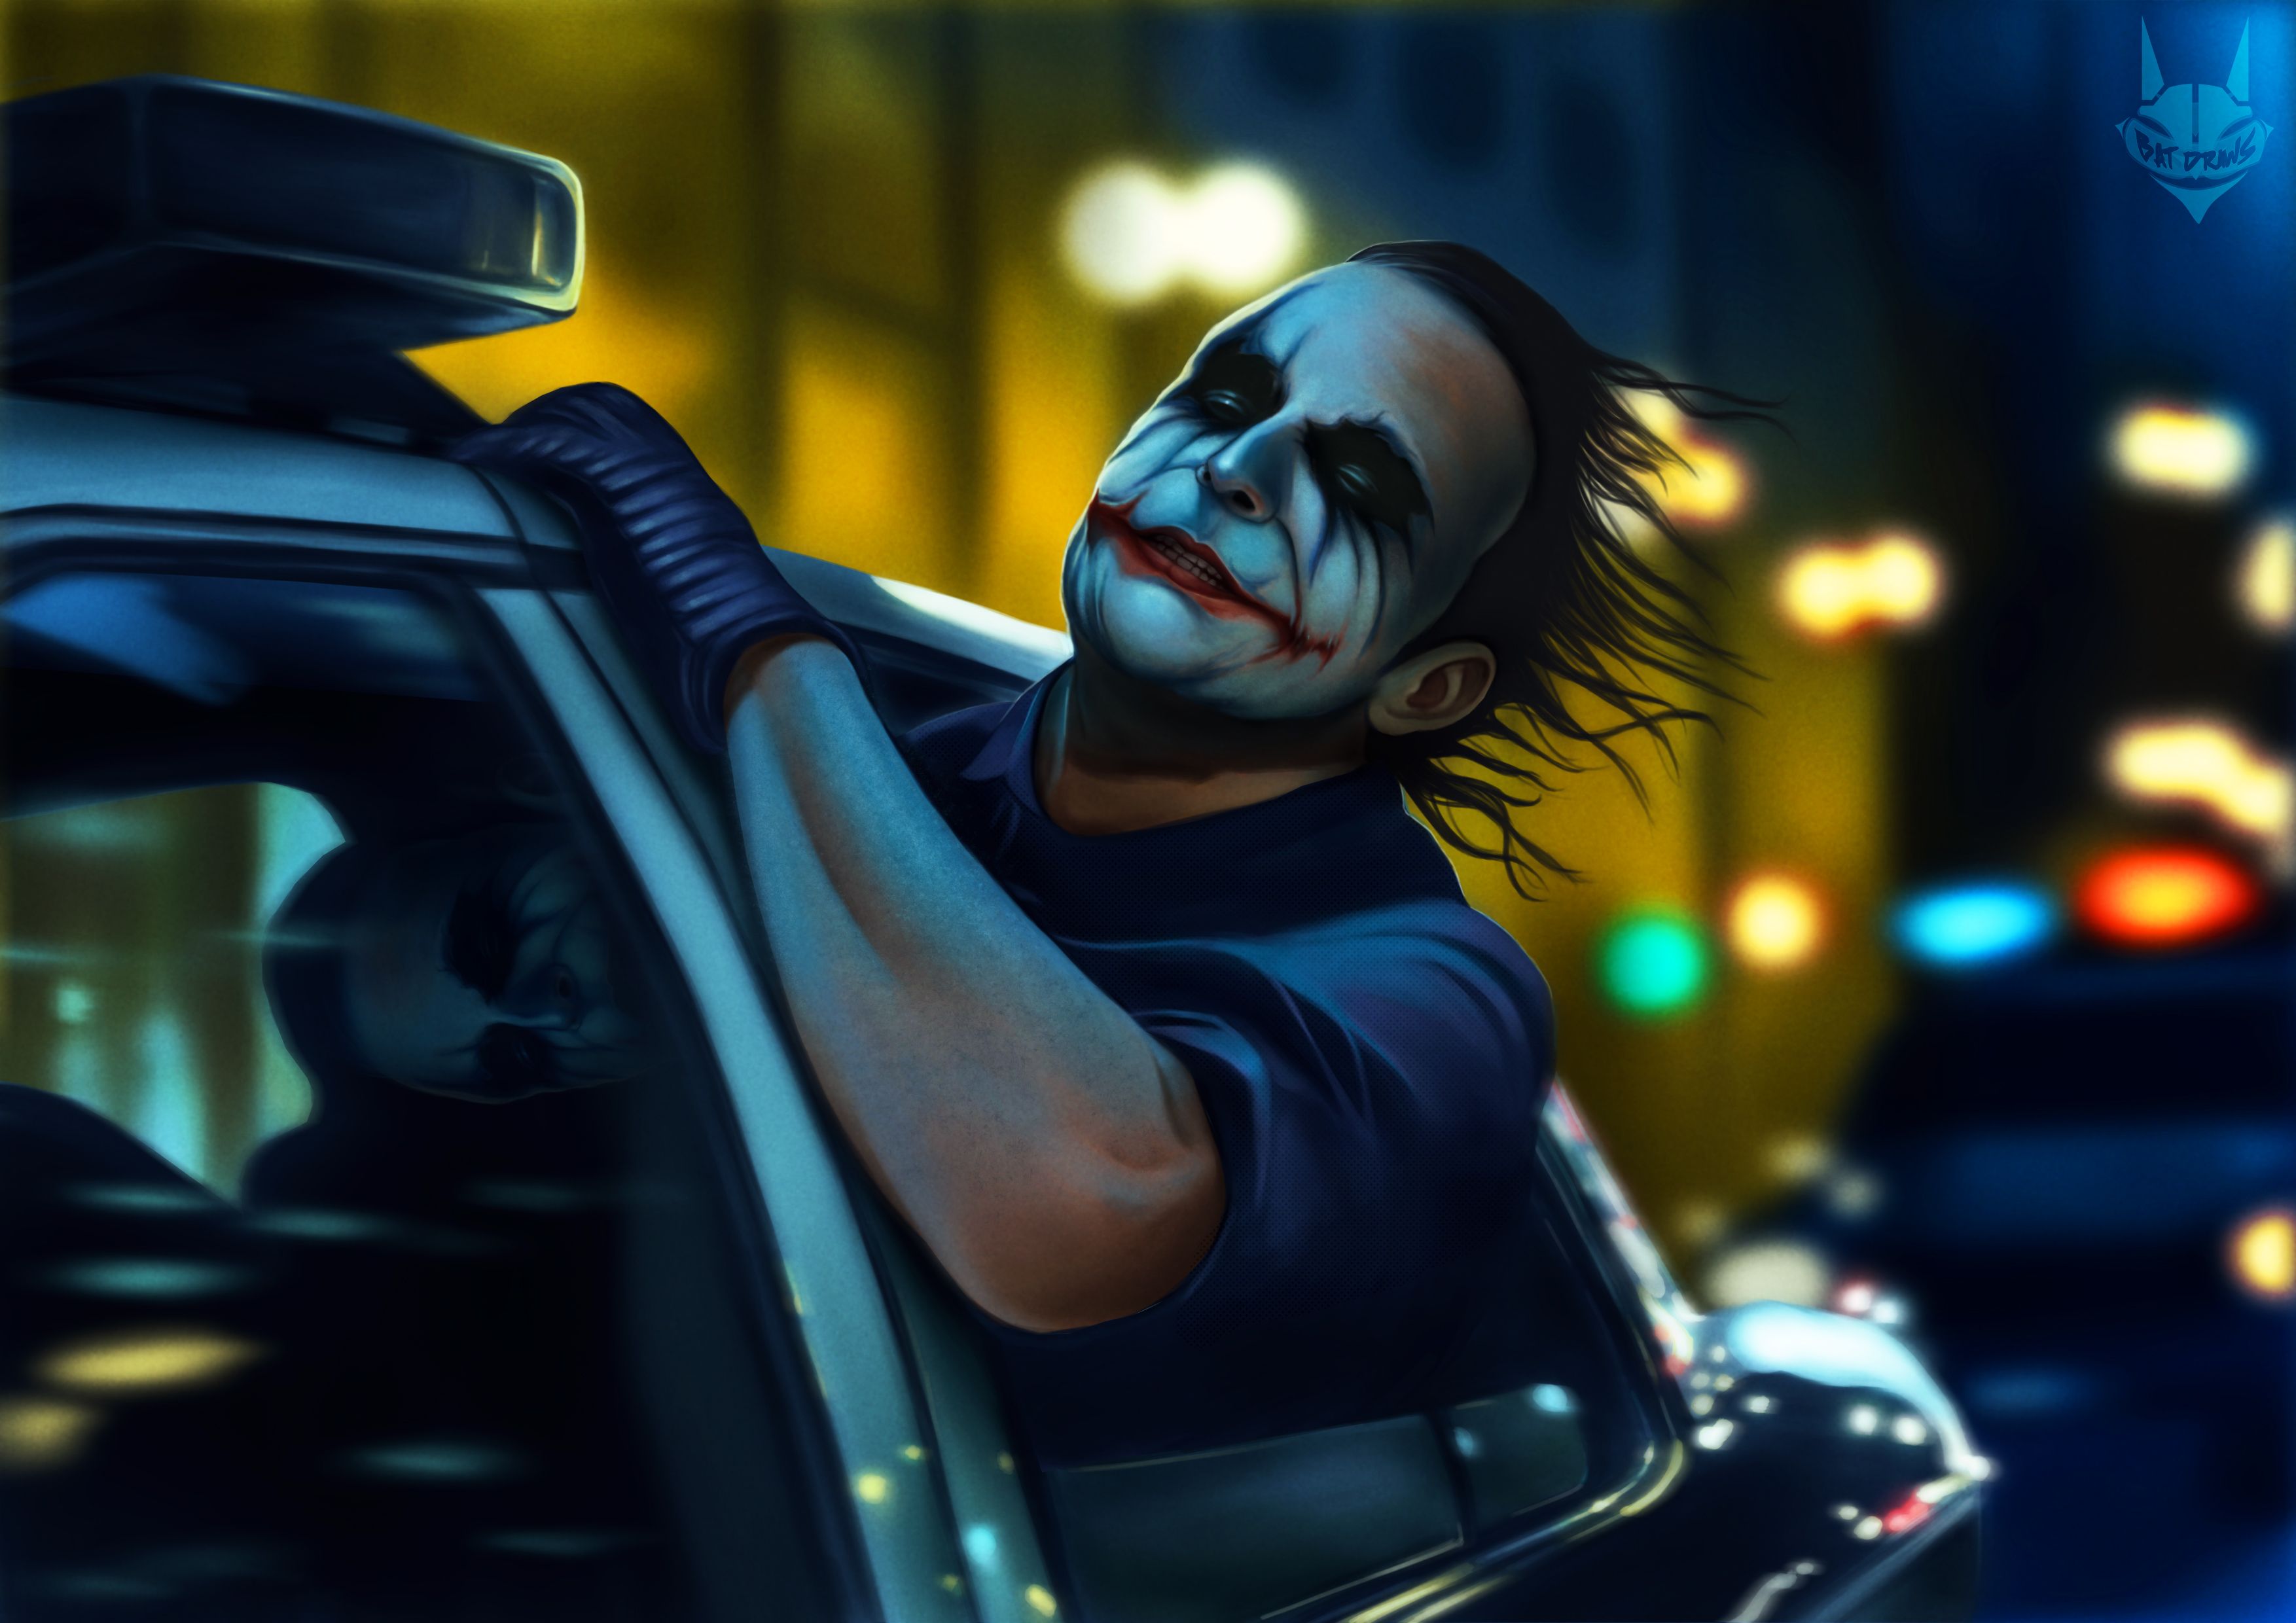 Joker The Dark Knight 4k 2018 1680x1050 Resolution HD 4k Wallpaper, Image, Background, Photo and Picture